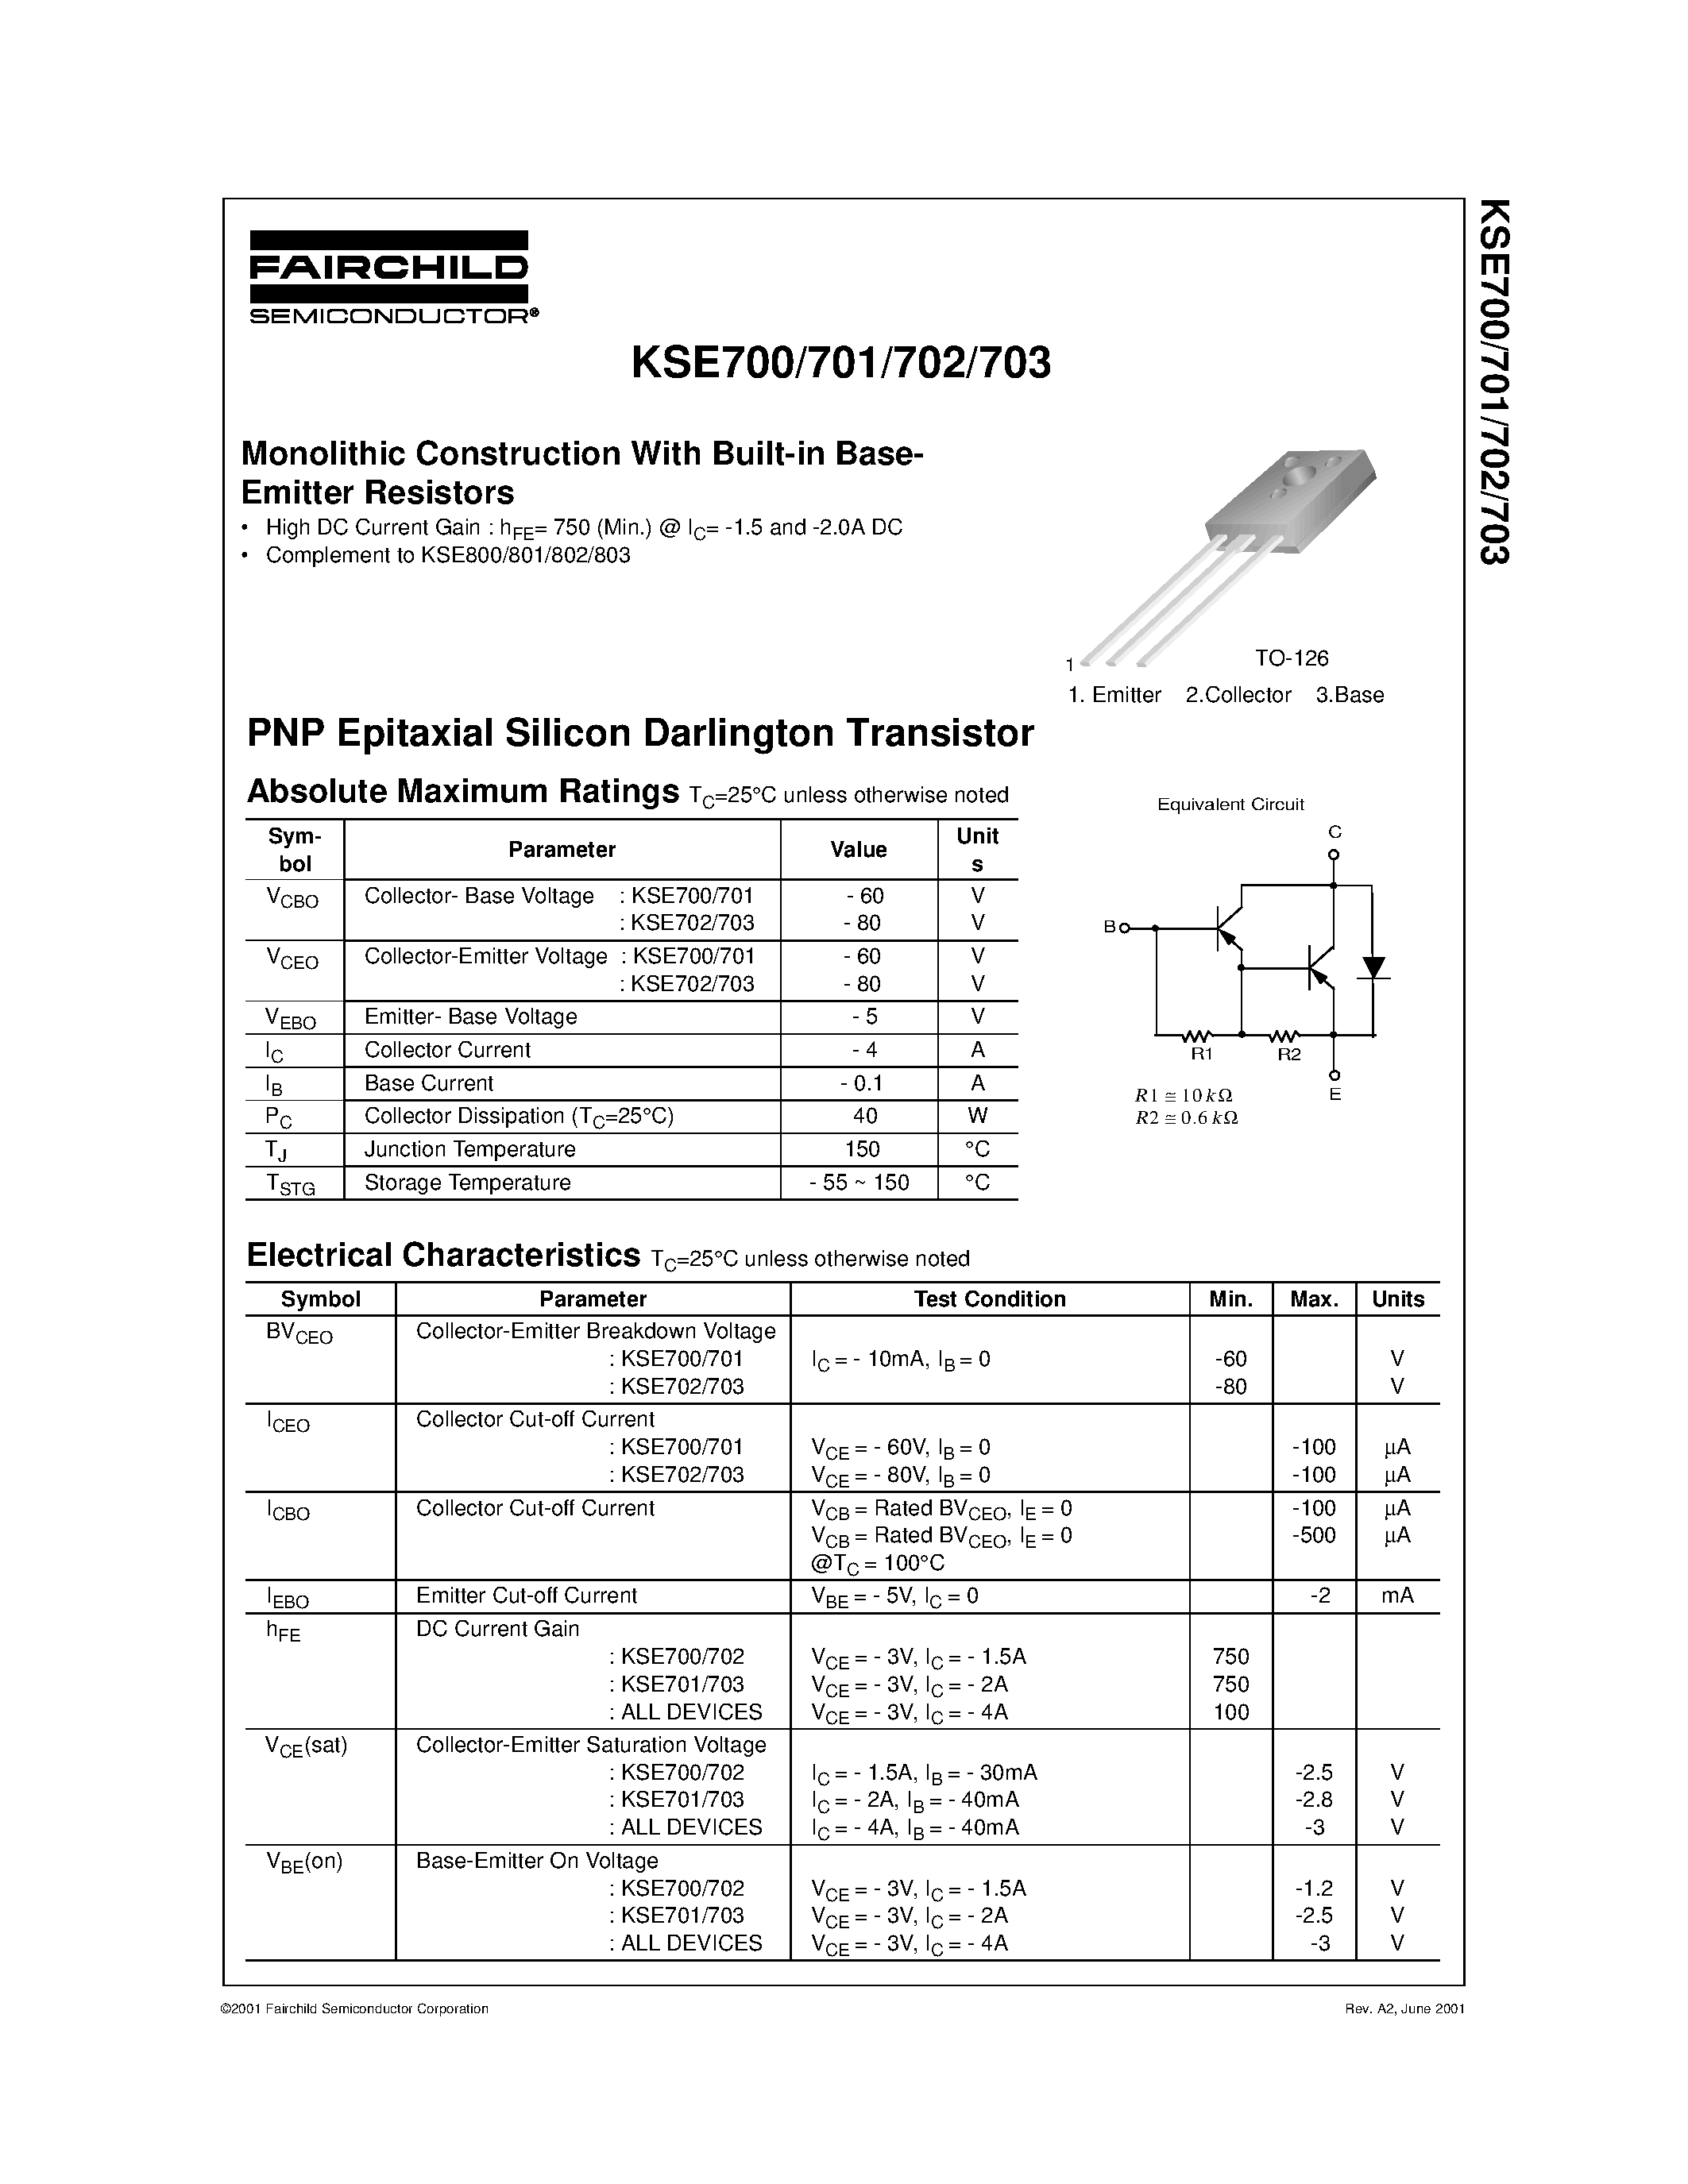 Datasheet KSE703 - Monolithic Construction With Built-in Base- Emitter Resistors page 1